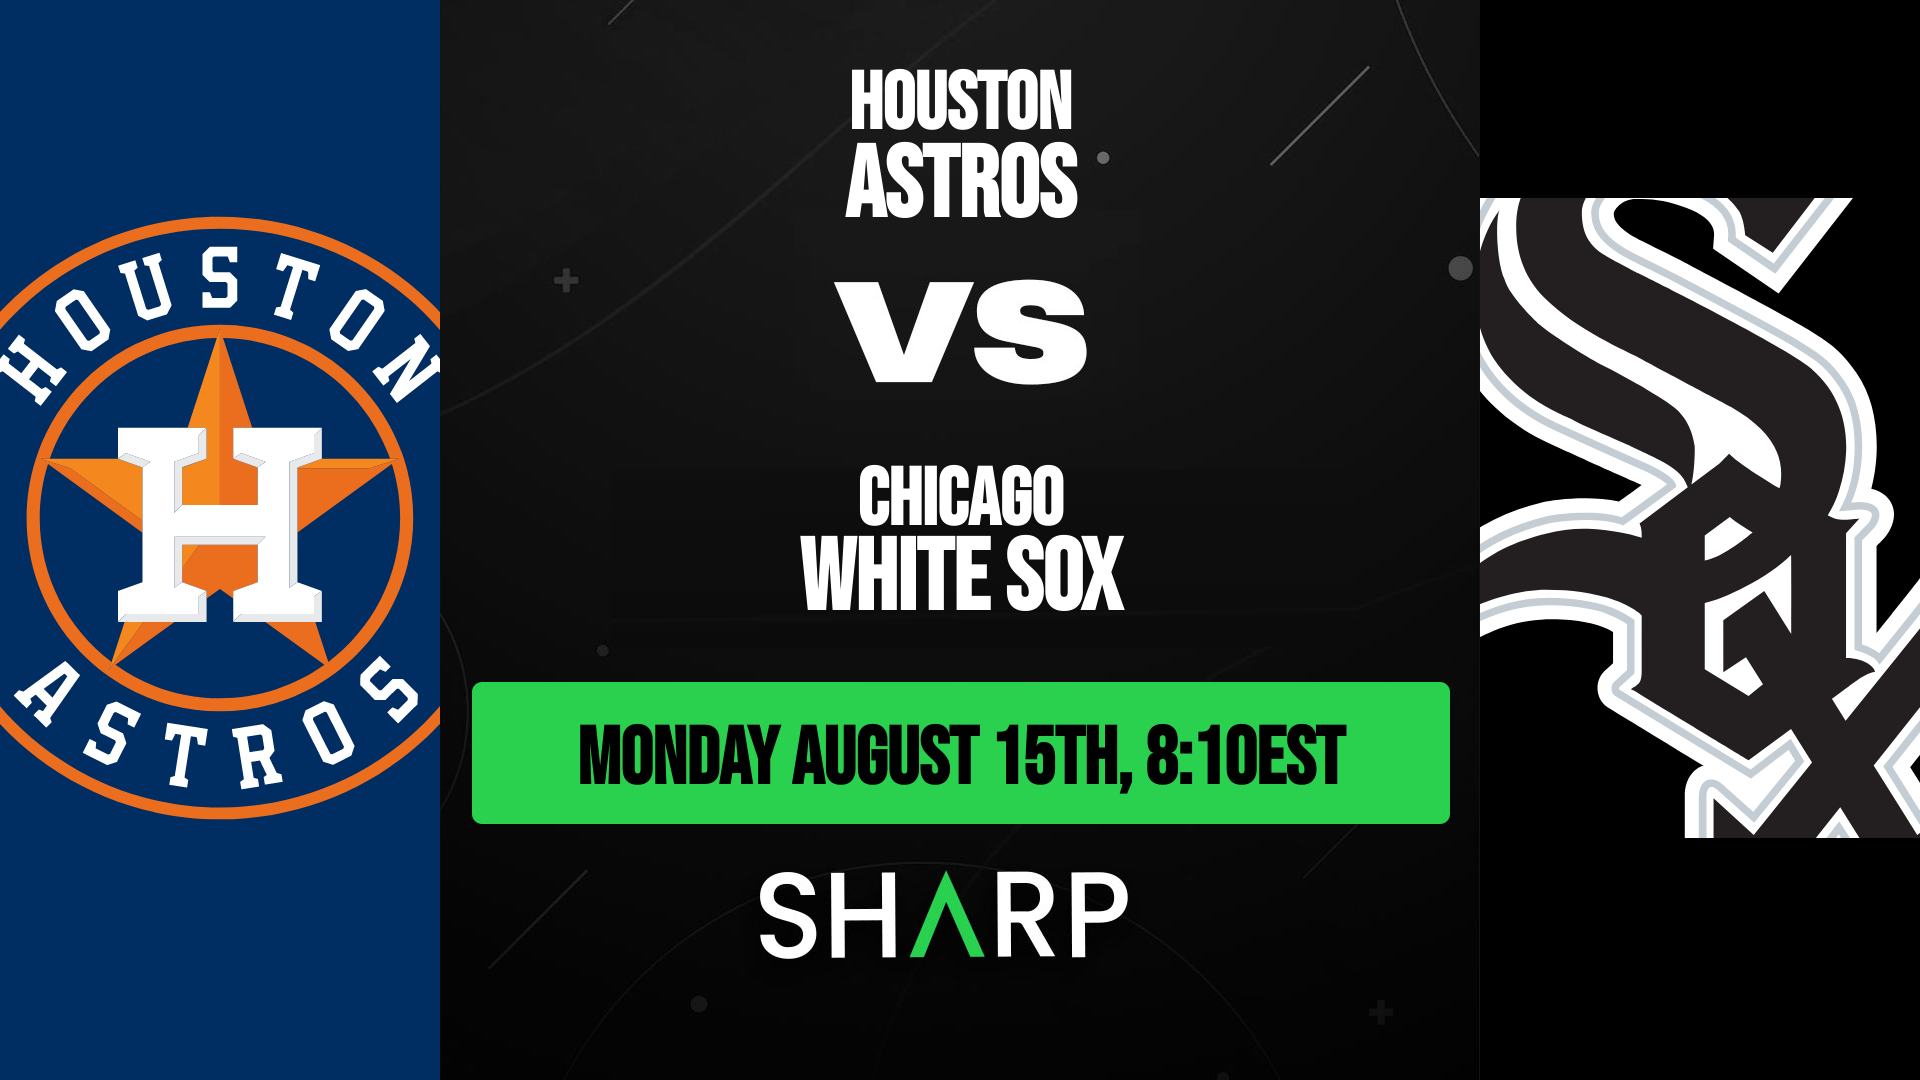 Houston Astros @ Chicago White Sox Matchup Preview - August 15th, 2022